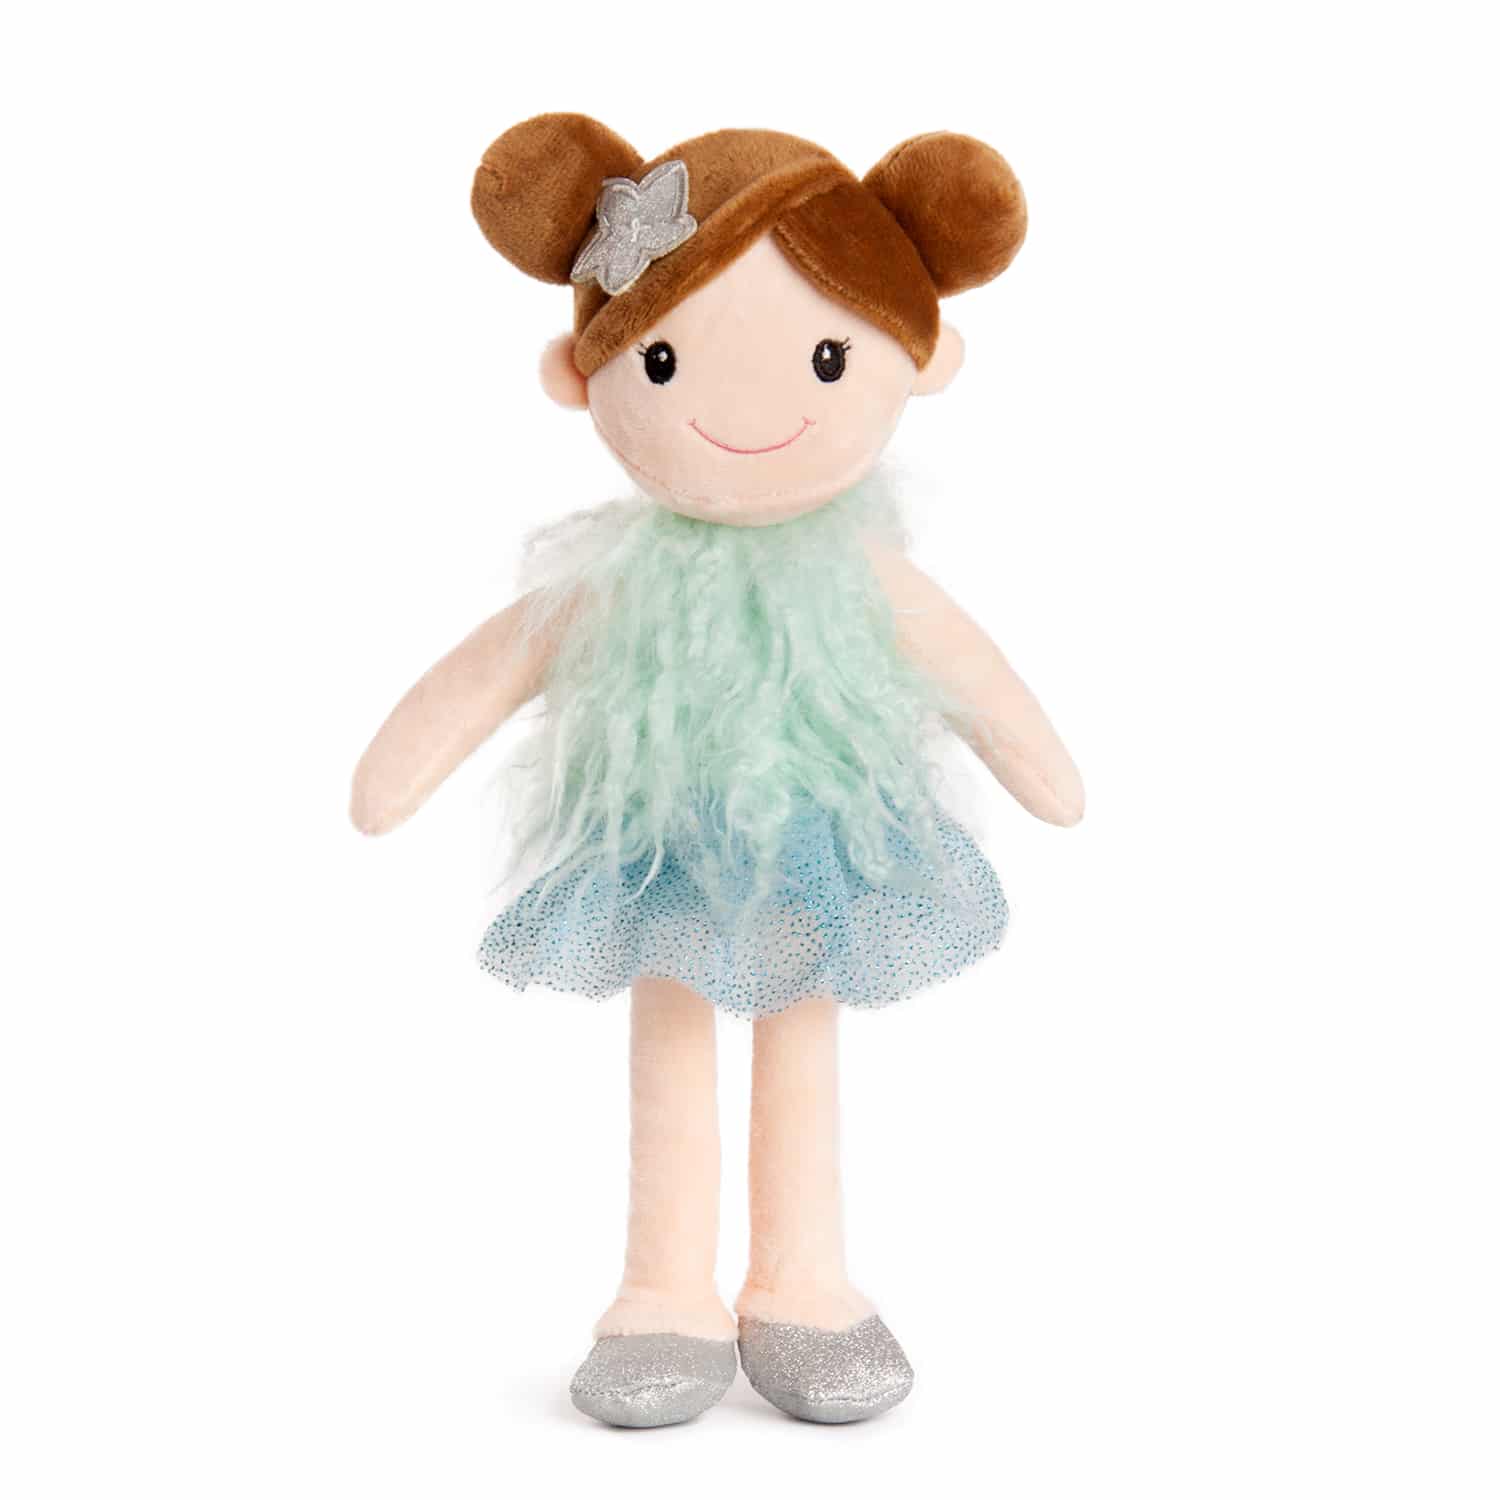 Doll with spectacular clothes - Green